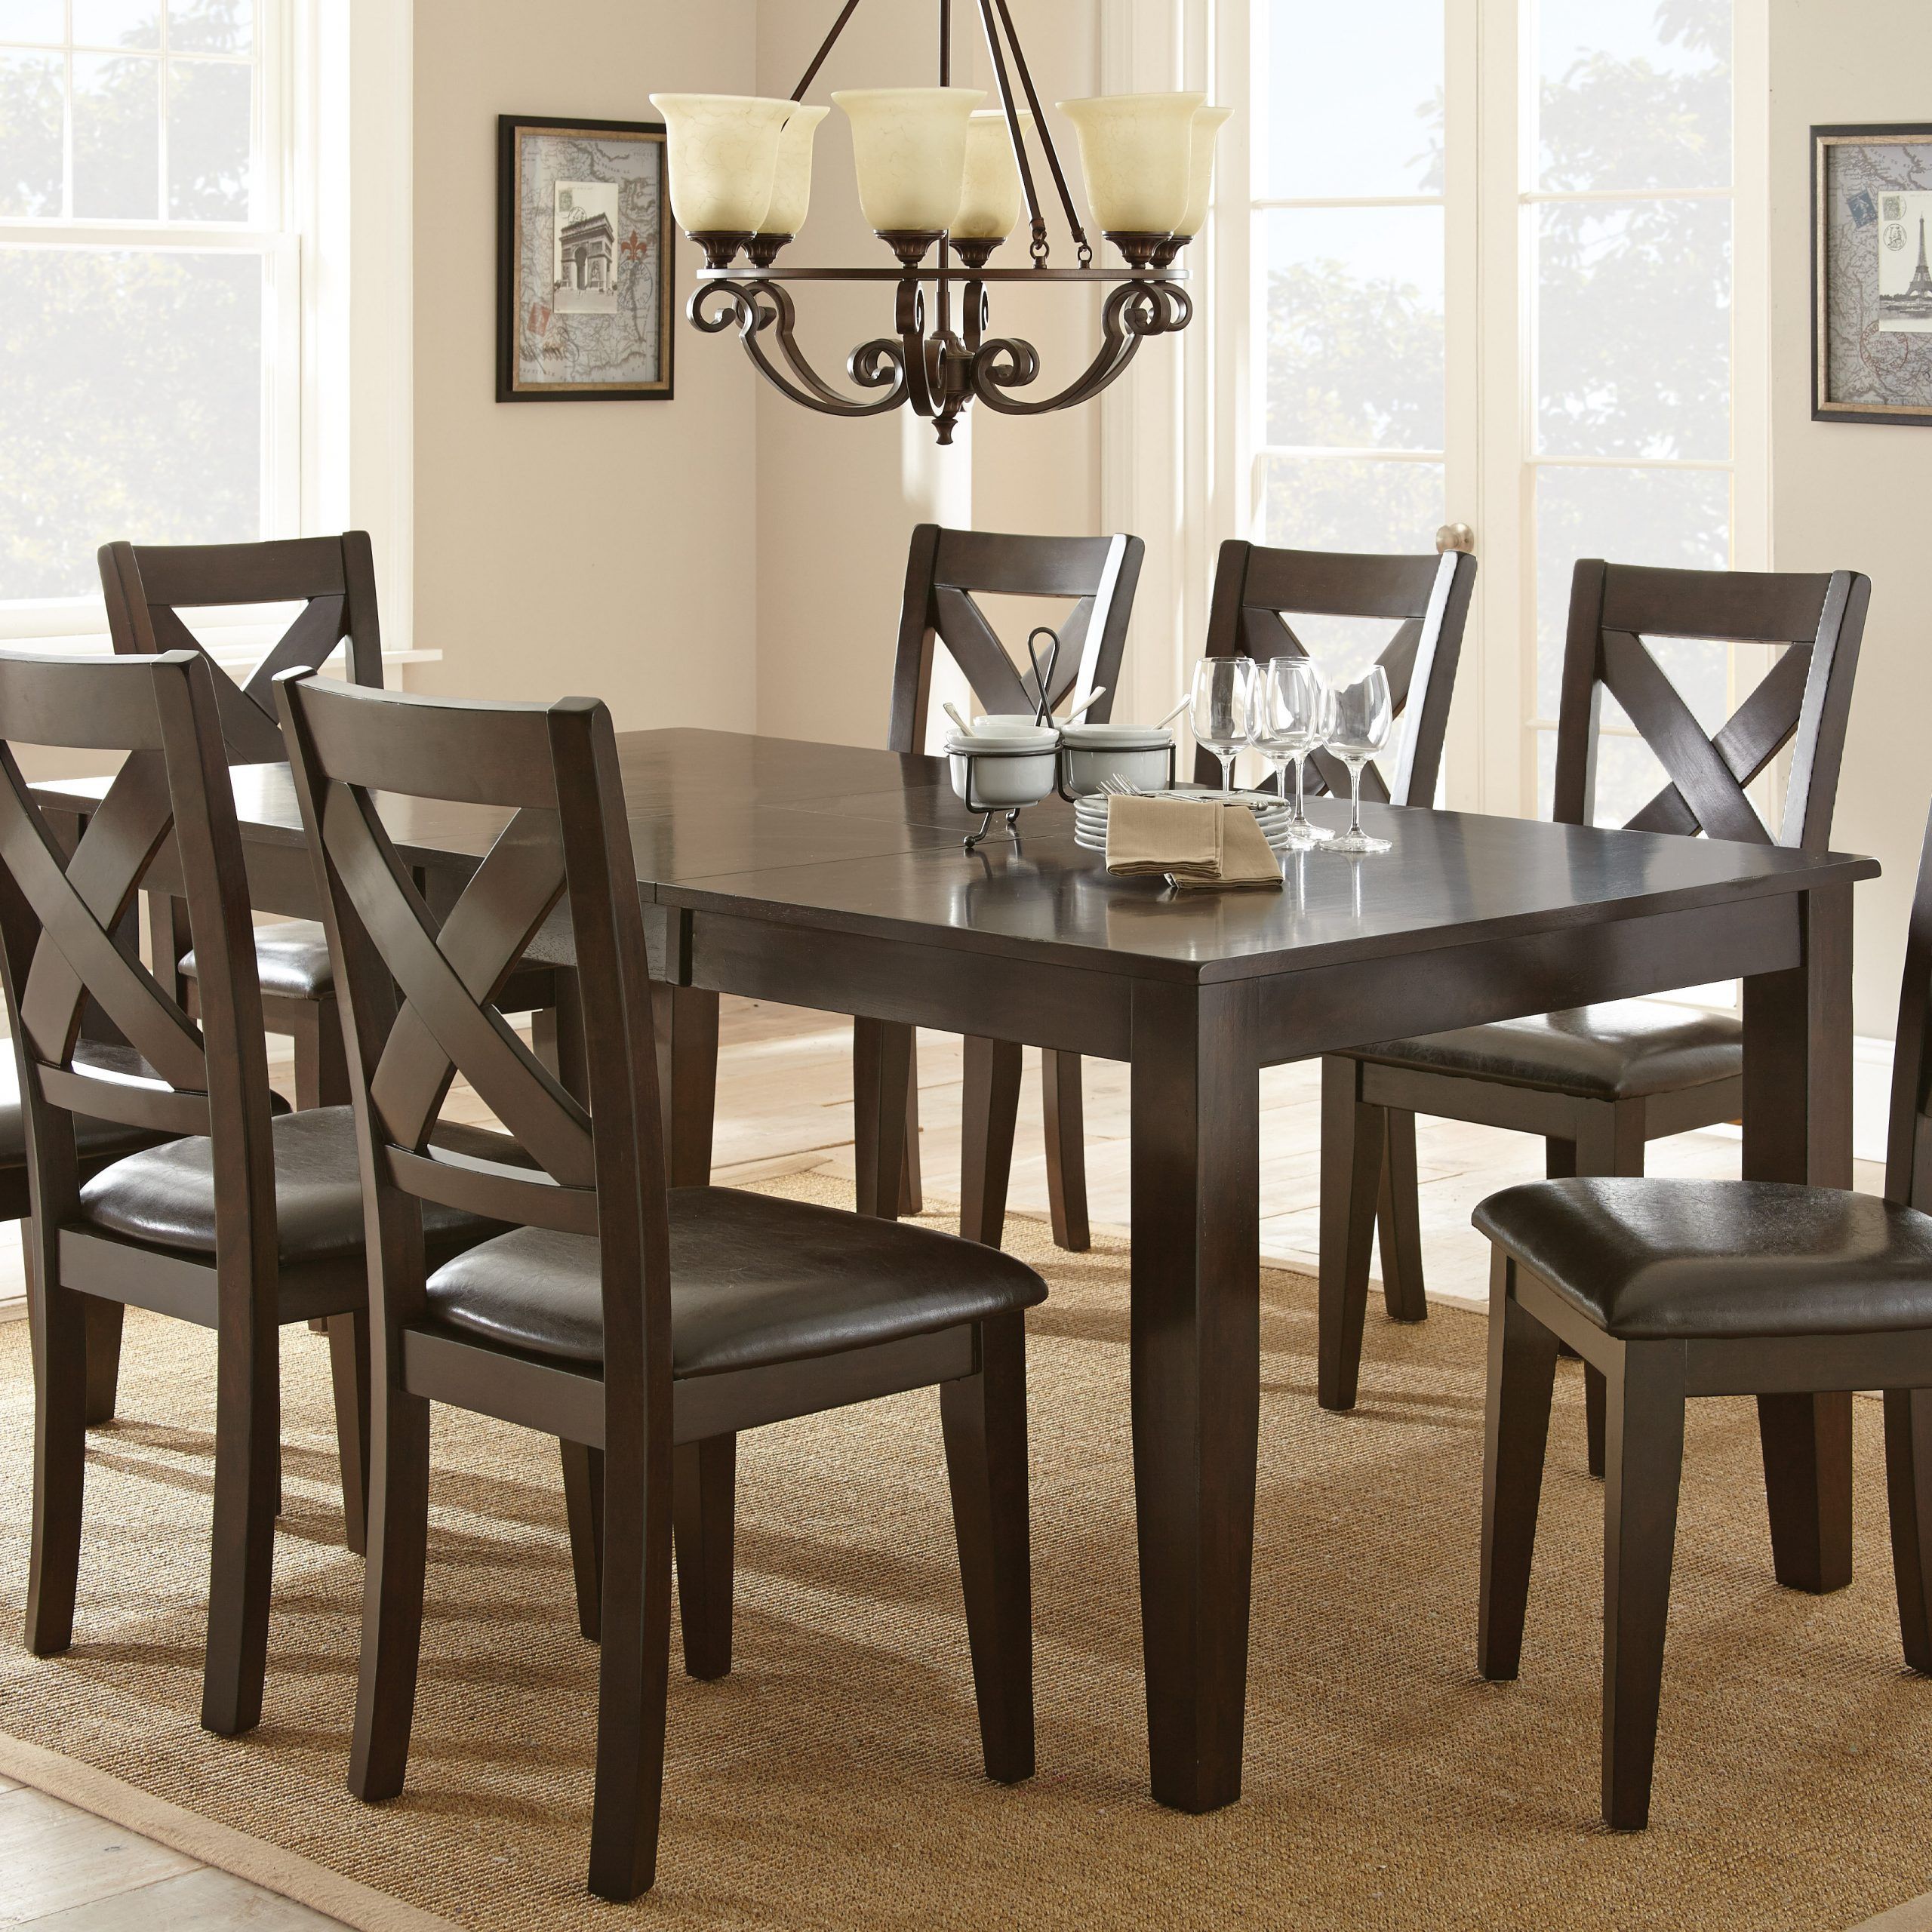 Wayfair Throughout 9 Piece Oval Dining Sets (View 11 of 15)